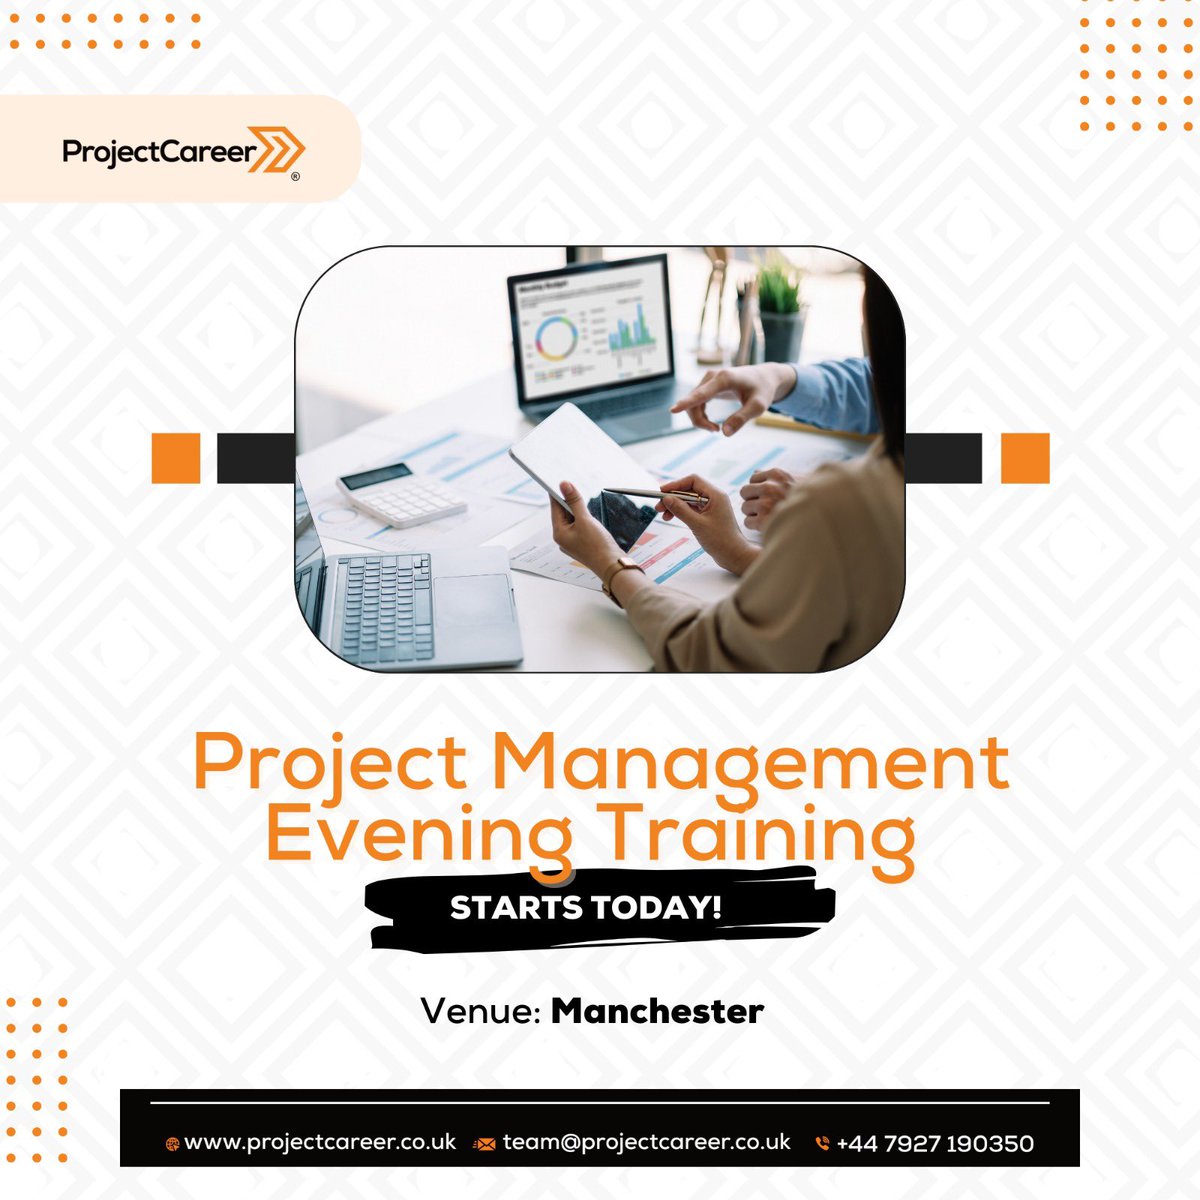 Our project management evening training starts today! 

Where would you rather be this evening? Hurry to our website to register and save your spot! 

#frankocean 
#westbrook
#MondayMotivation 
#Arsenal 
#Welsh
#EducationSavesLives
#Guinea
#projectmanagement 
#onlinelearning